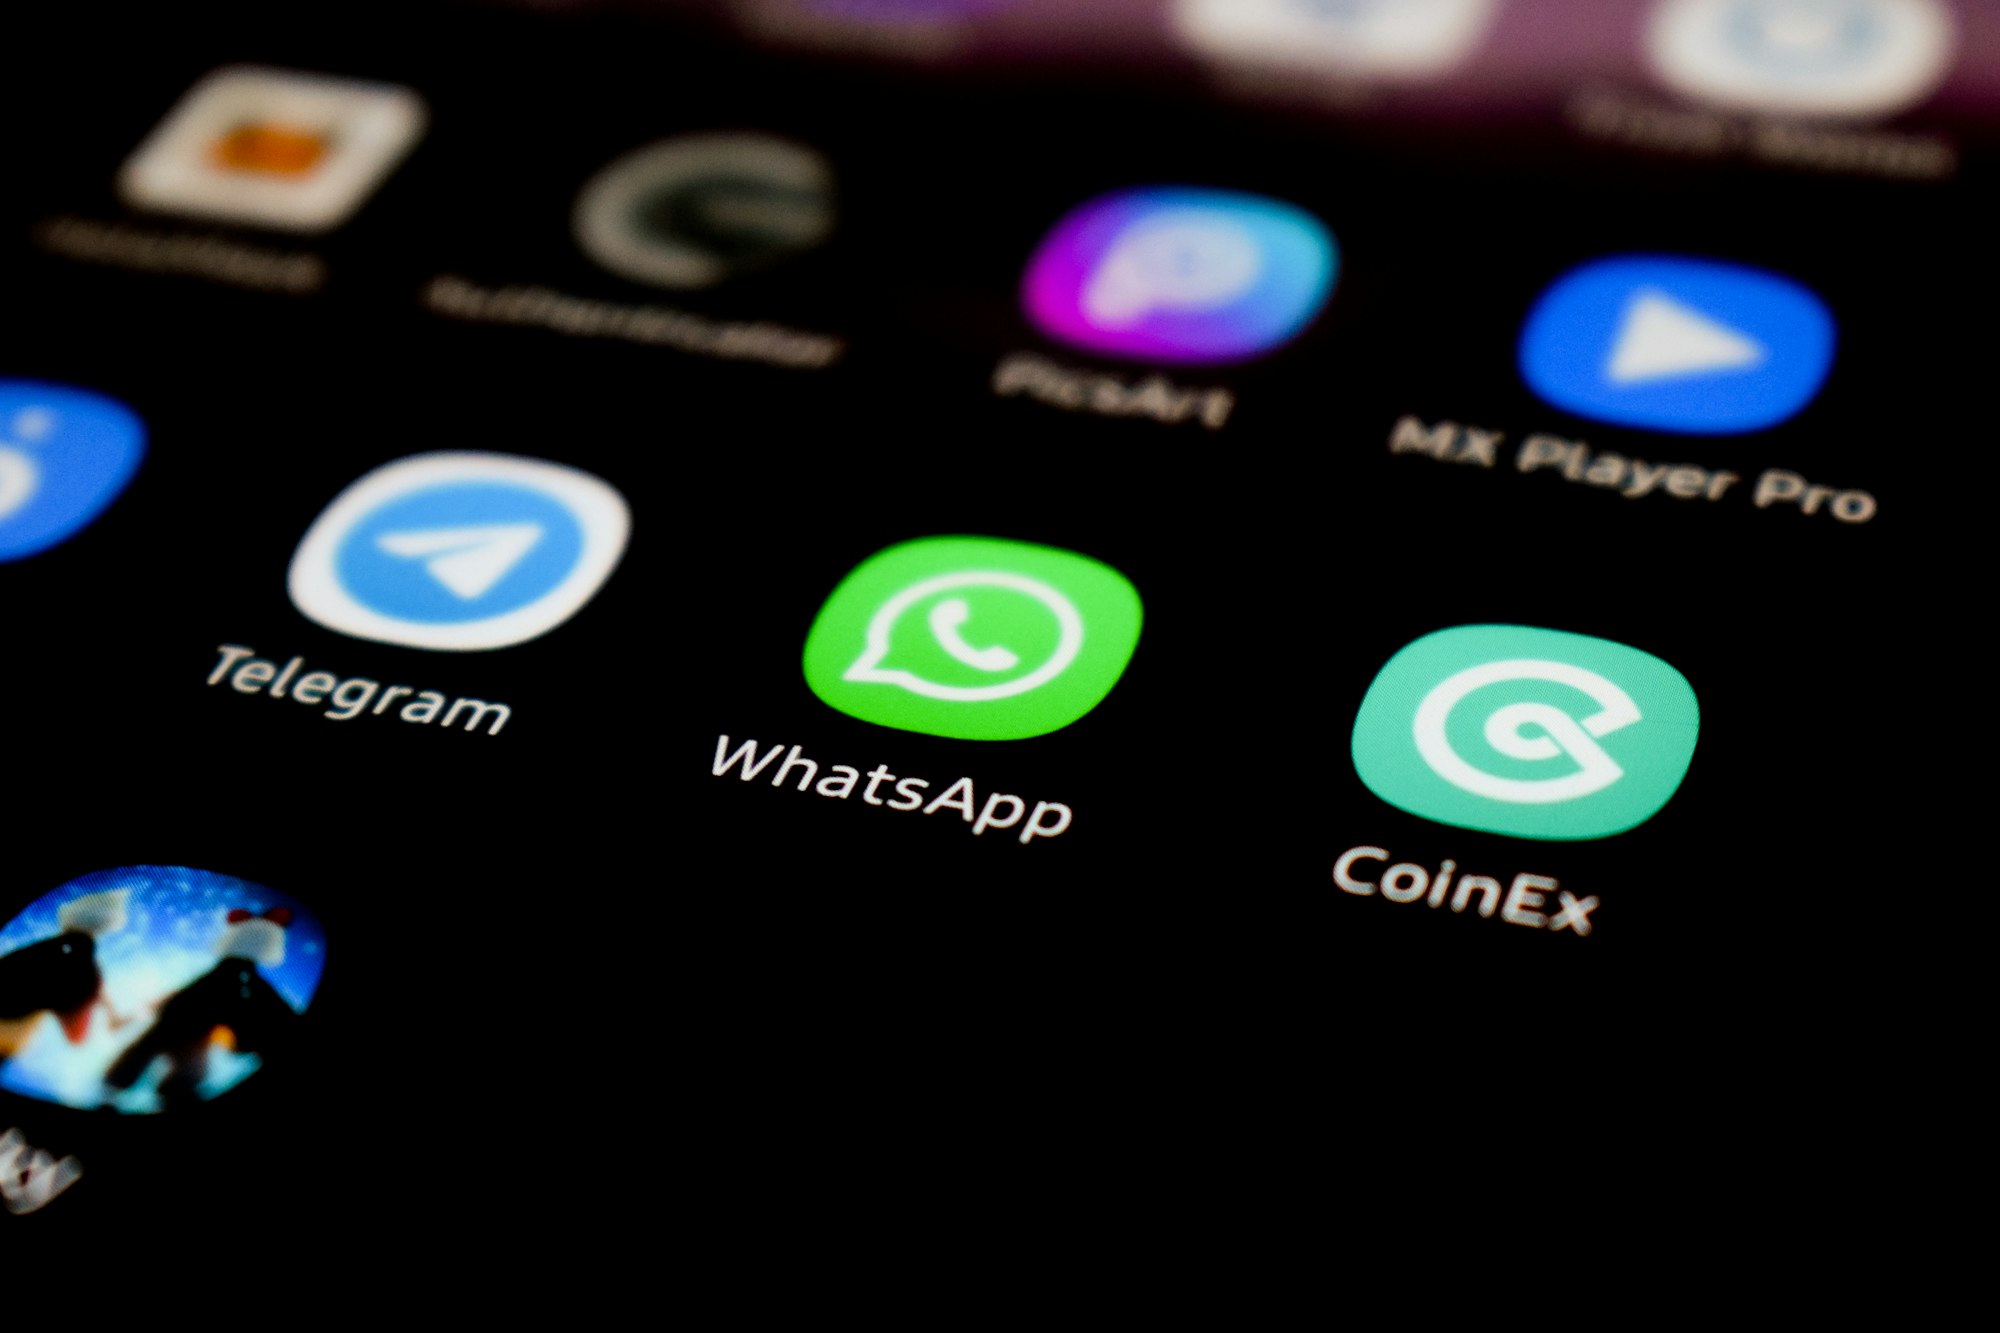 WhatsApp unveils event feature for community group chats